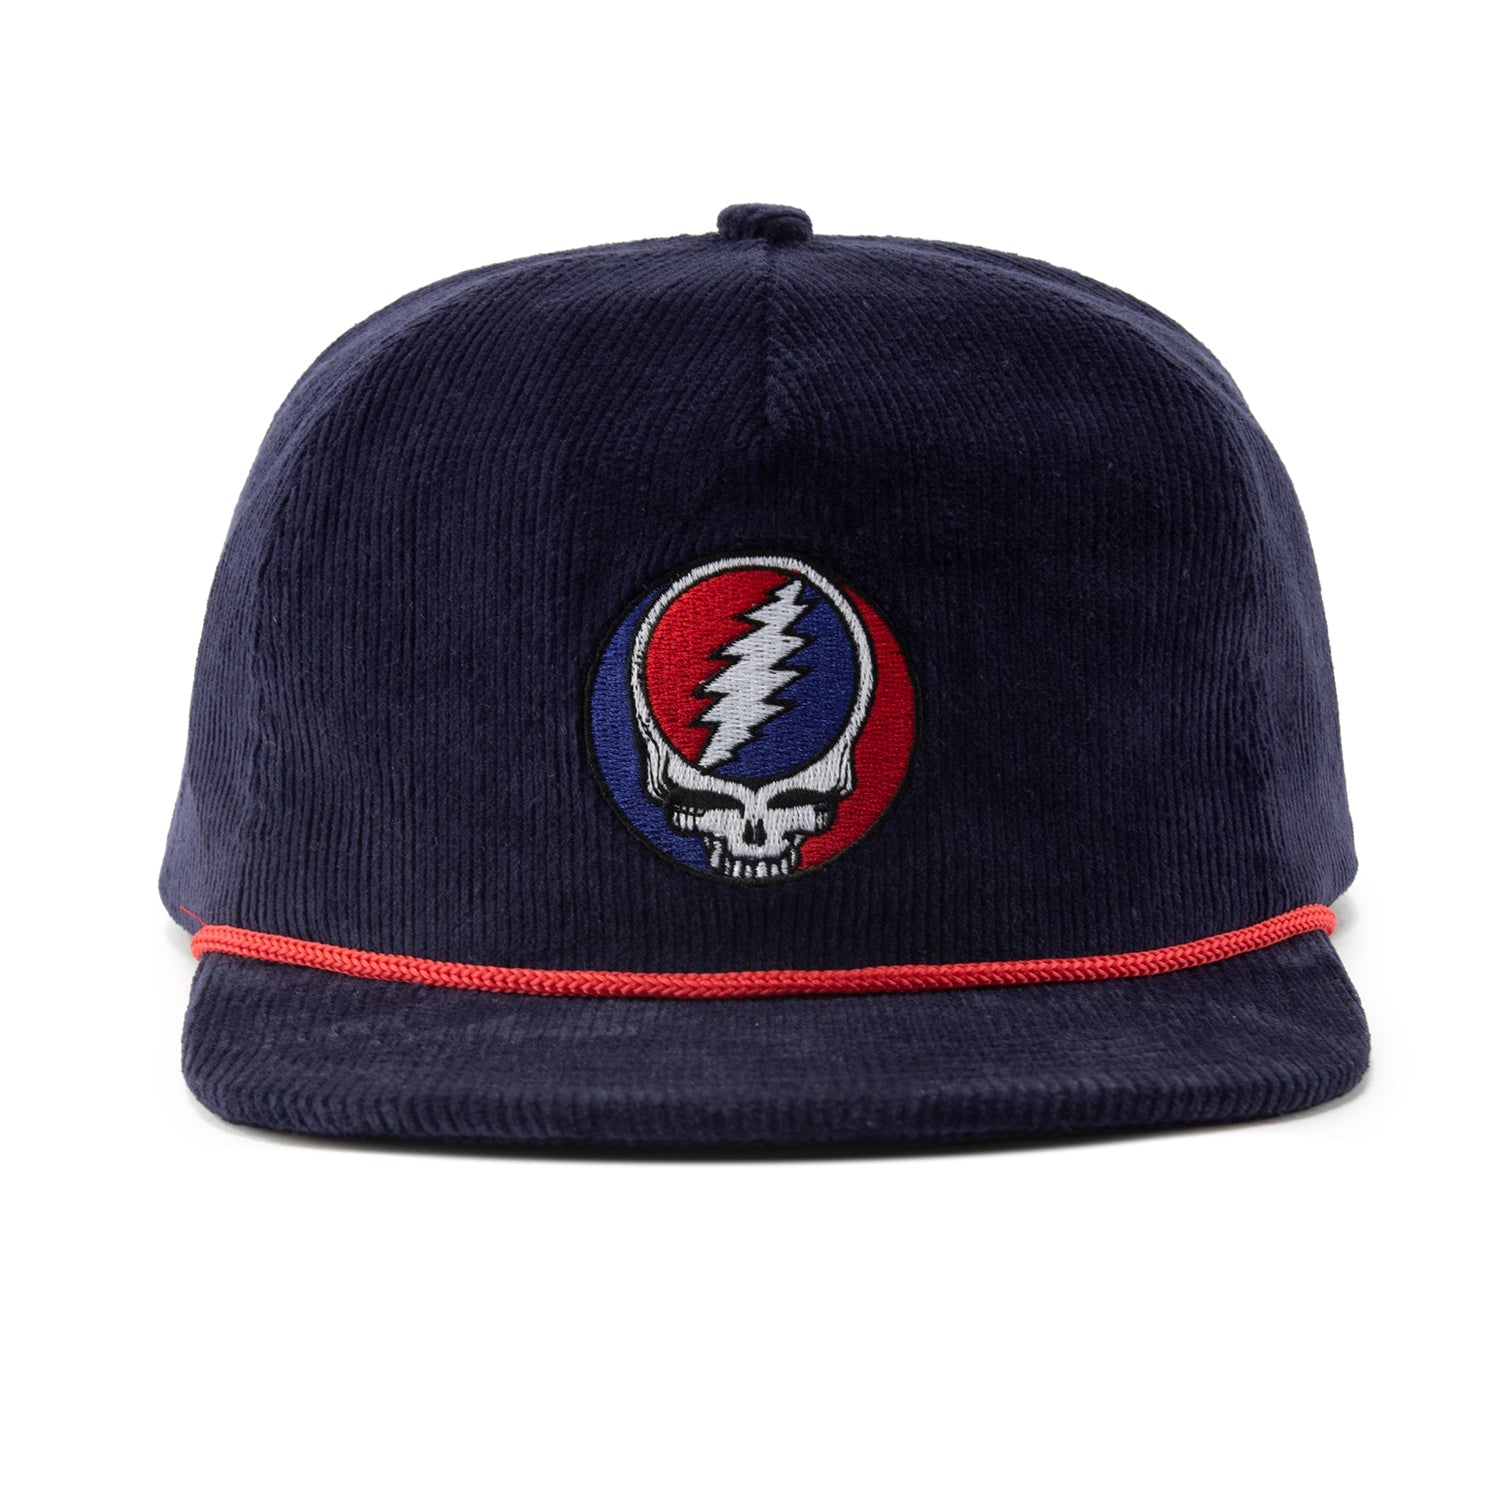 Grateful Dead x TGR Steal Your Face Corduroy Snapback - Teton Gravity Research